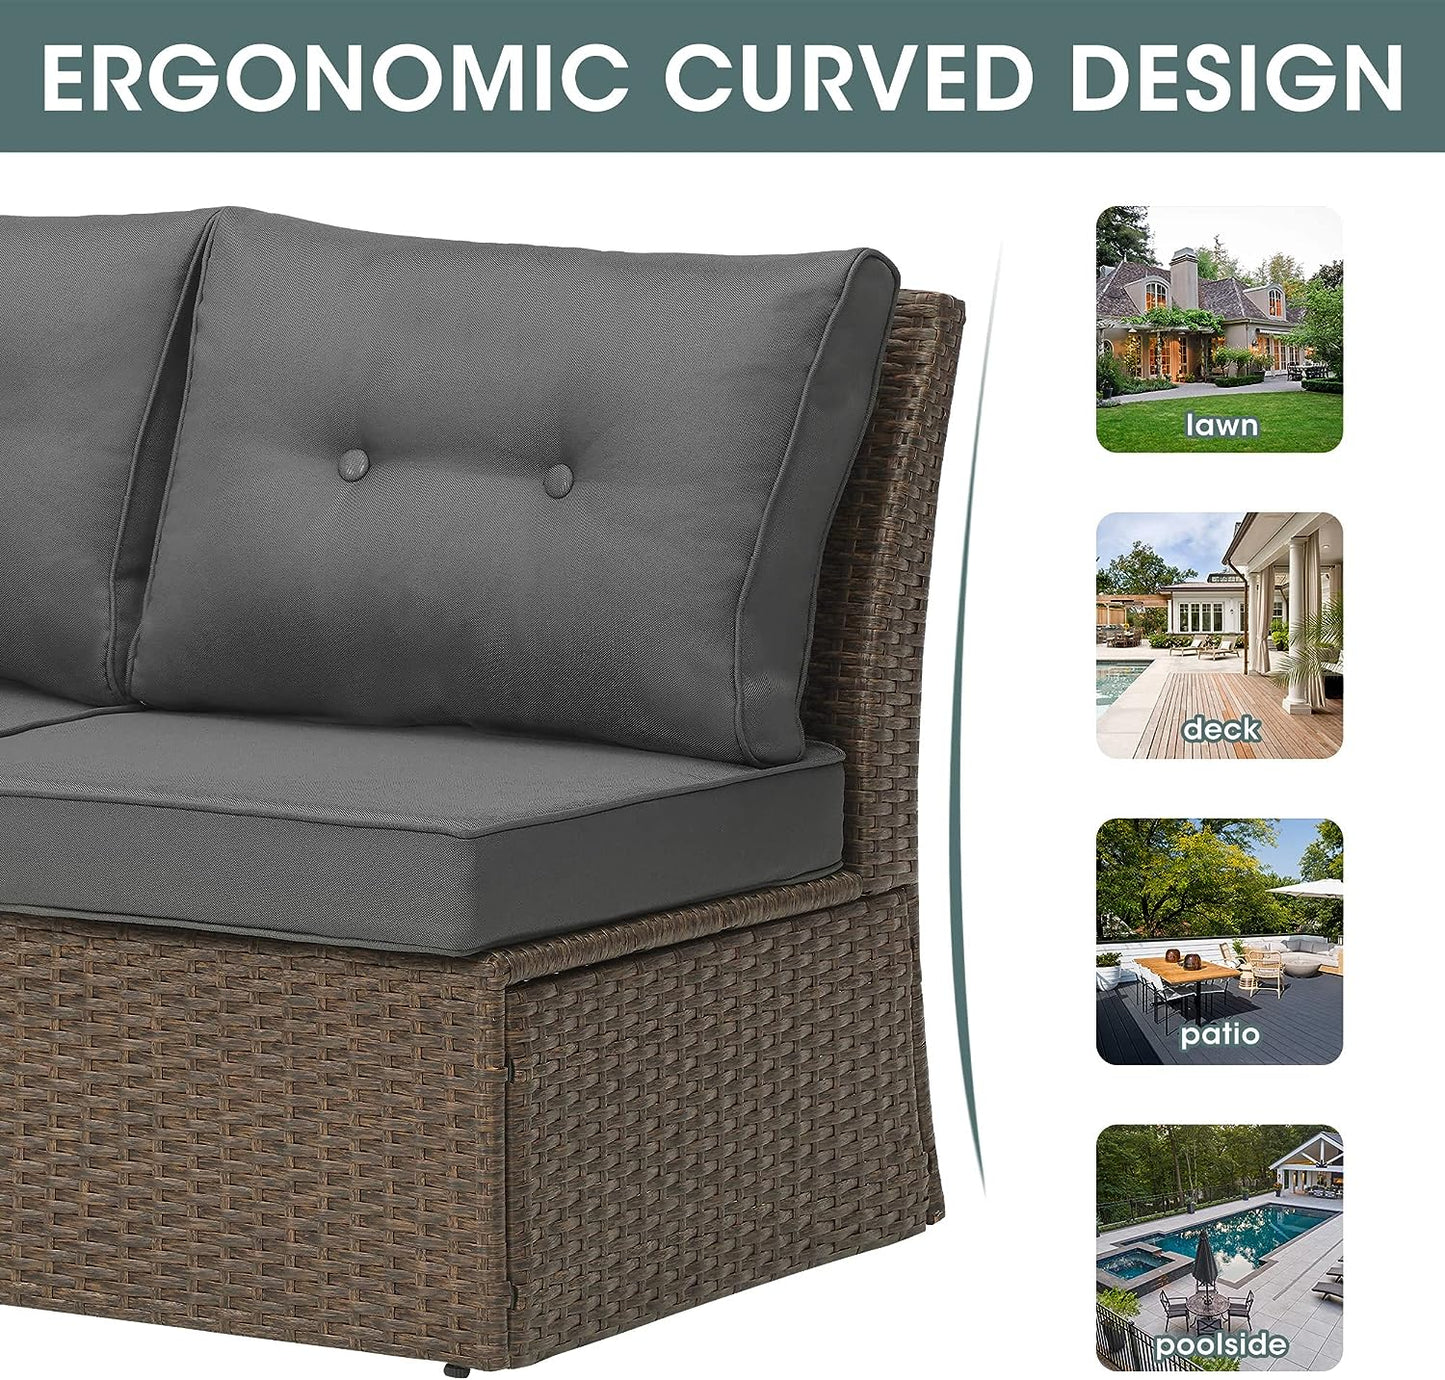 SUNVIVI OUTDOOR Brown Wicker Patio Sofa Chair Armless with Dark Grey Cushions, Aluminum Frame Small Outdoor Couch Chair for Garden Backyard Pool,1 Piece